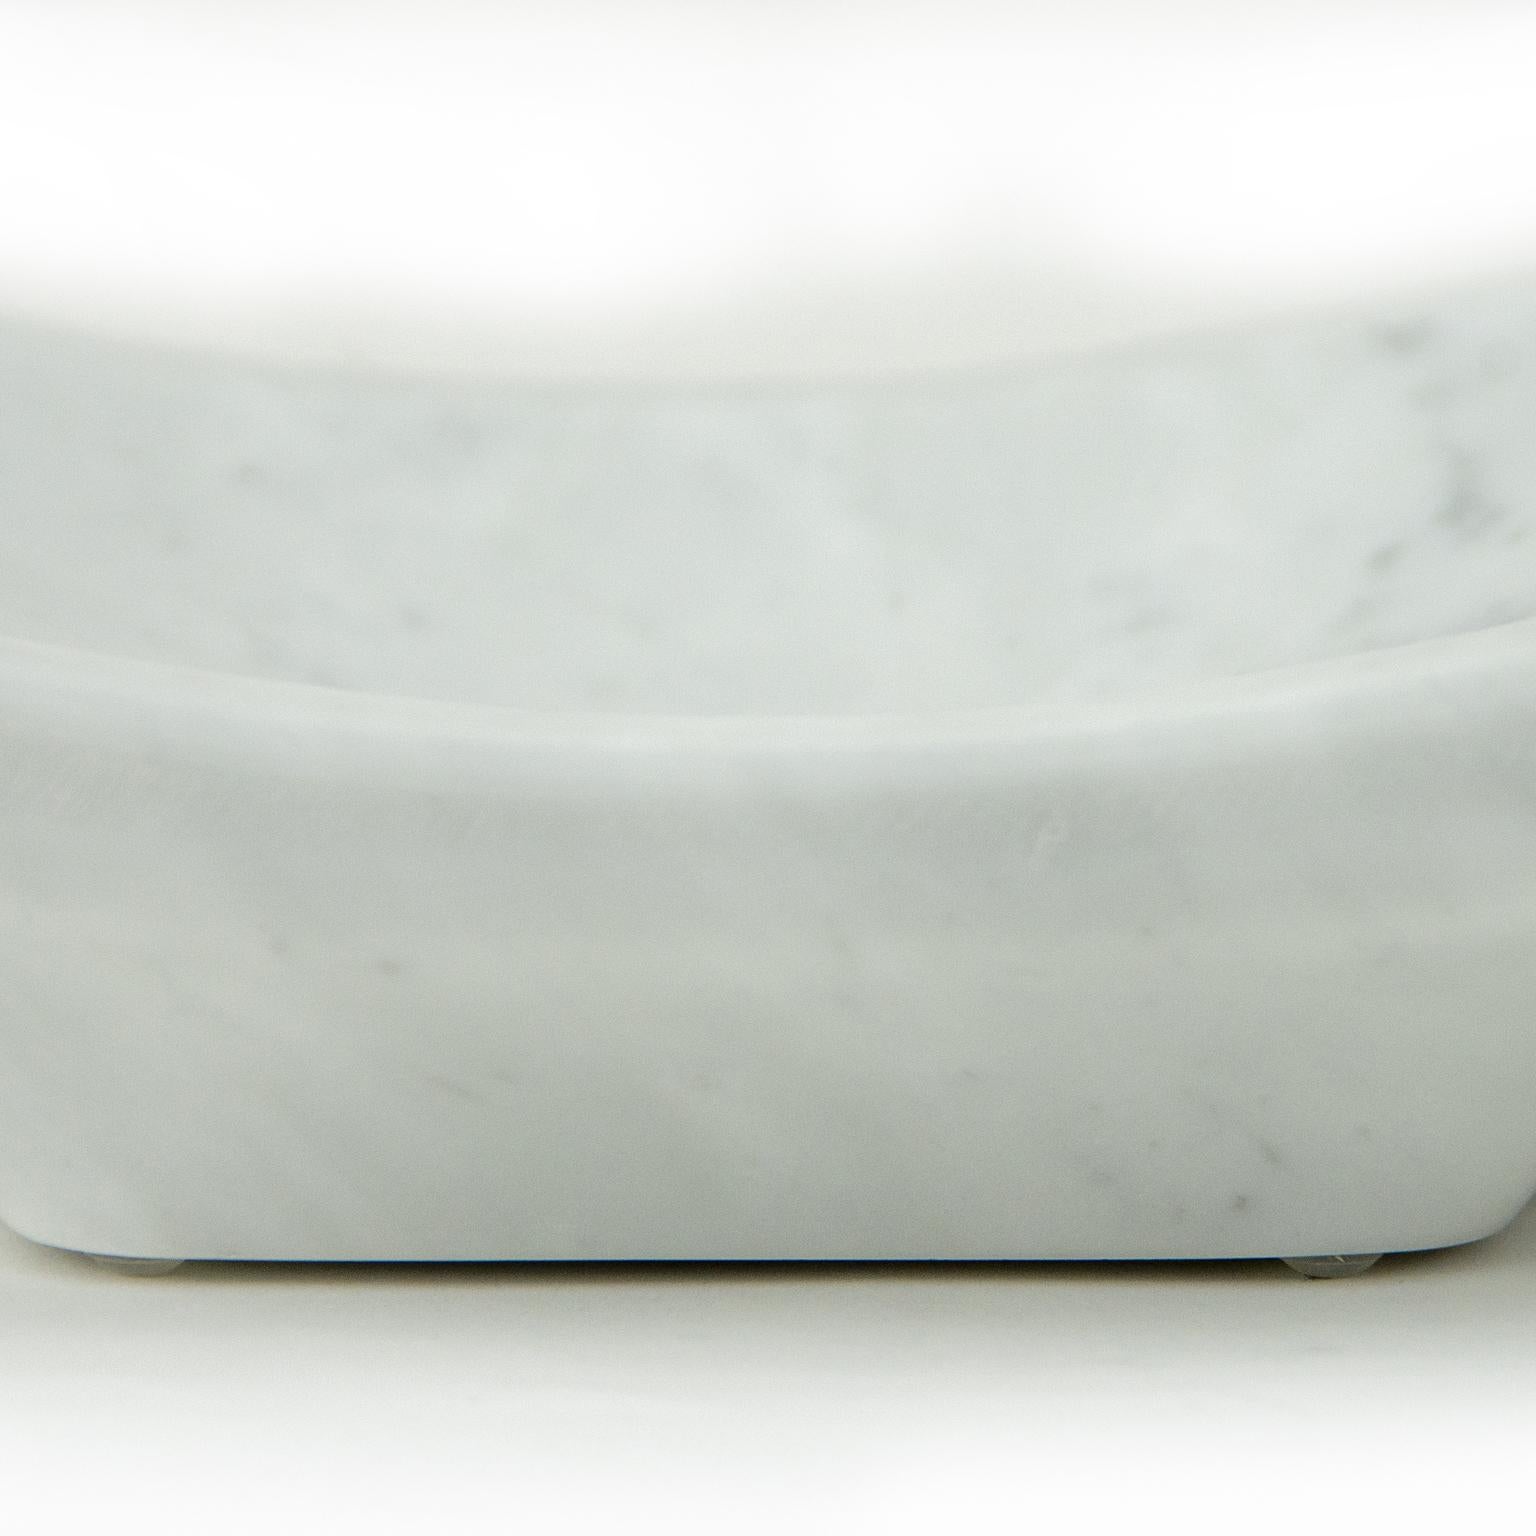 A unique marble bowl that is perfect for a centerpiece or for placing on its own in any interior space. Made of white Carrara marble. Made in Italy.
 